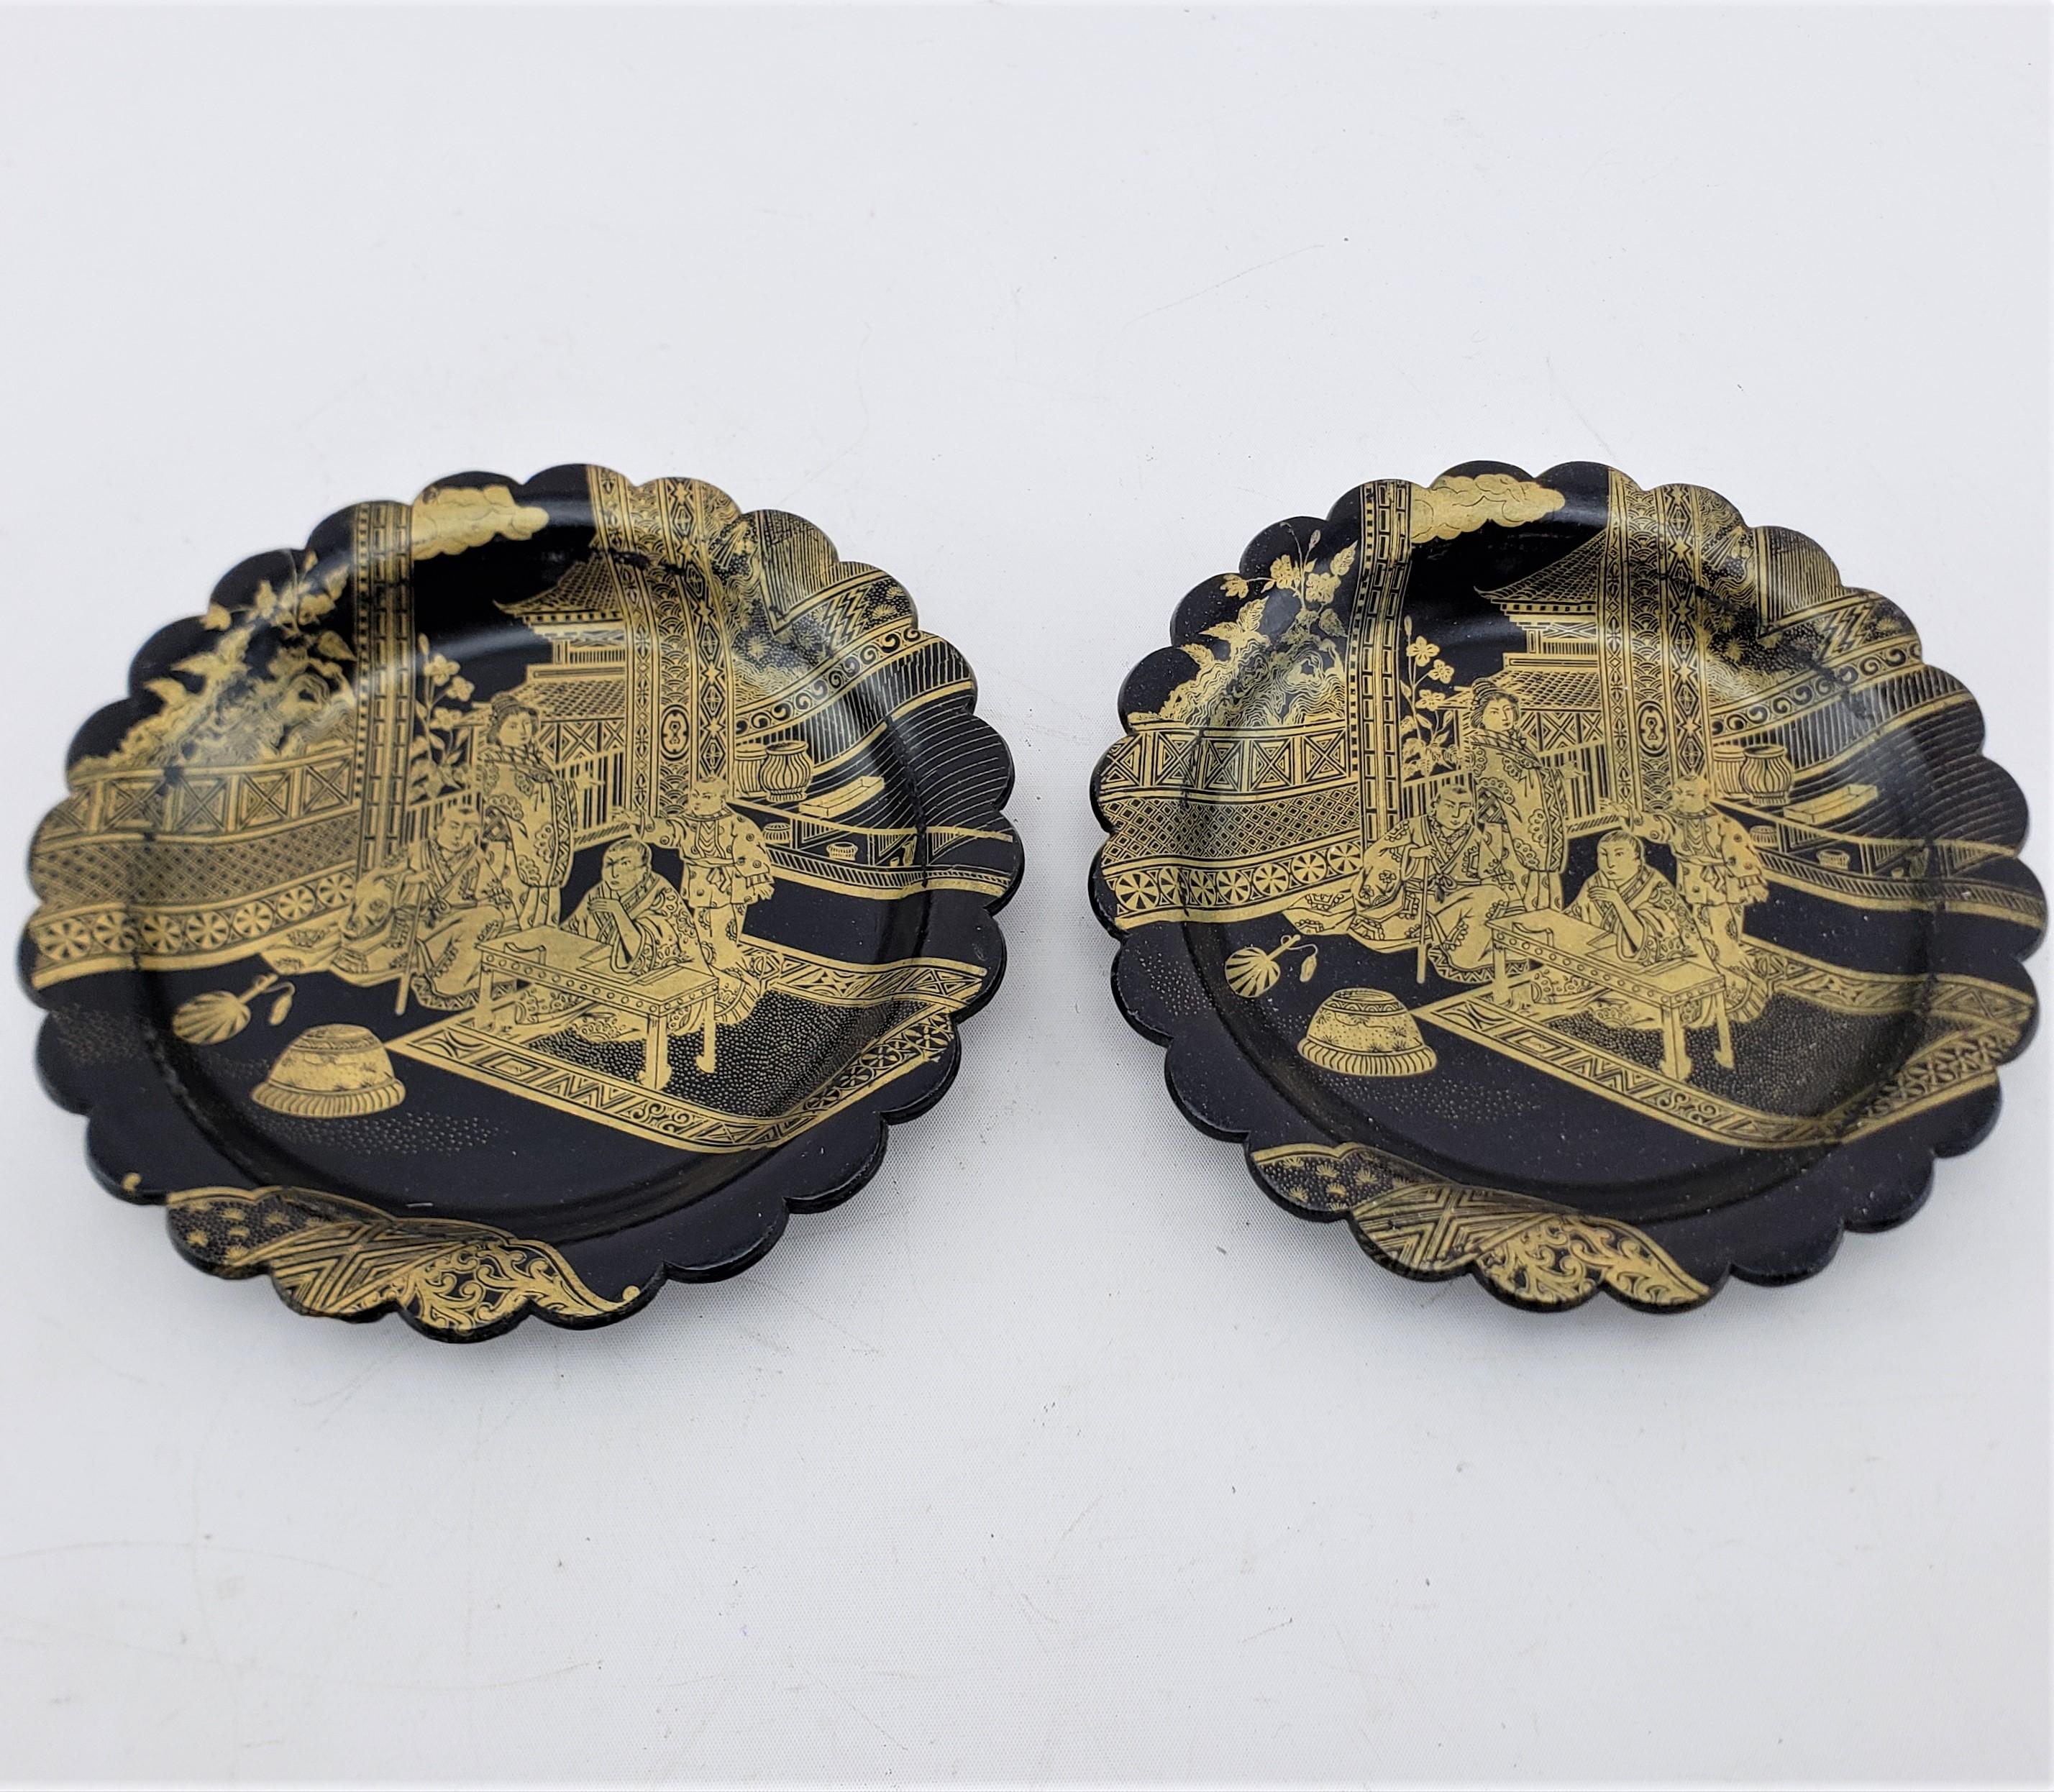 This pair of antique bottle coasters are unsighed, but presumed to have originated from China and date to approximately 1920 and done in the period Chinese Export style. The coasters are composed of paper mache with a ebonized finish and decorated